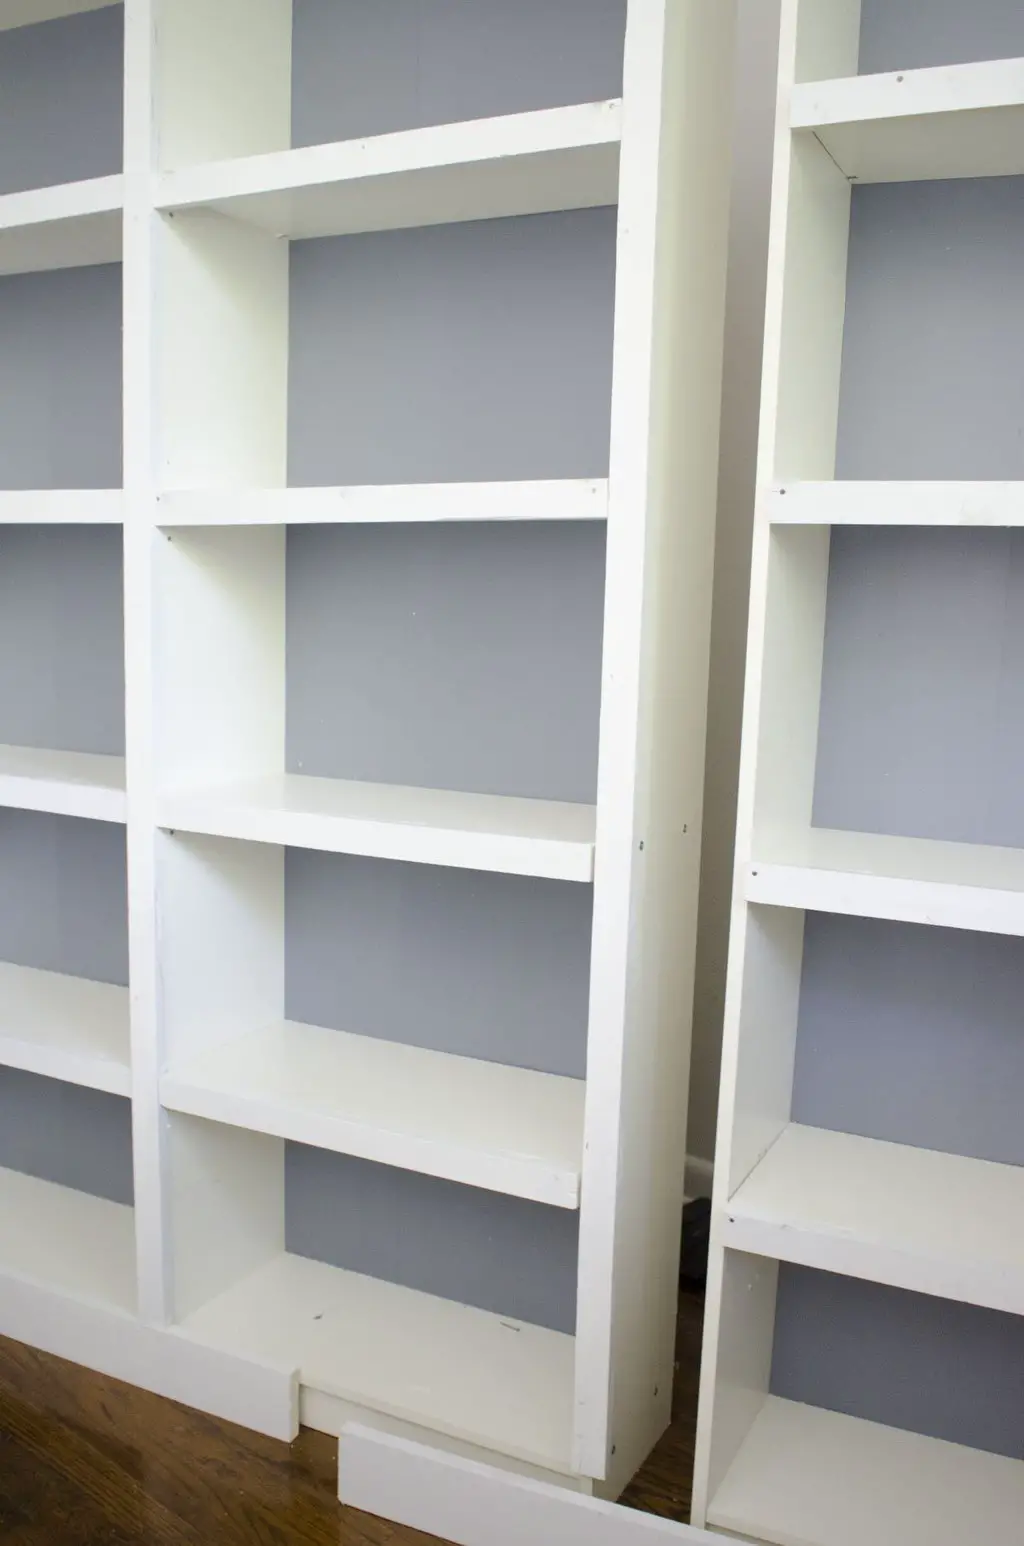 Built-in bookcases DIY Ikea hack on @thouswellblog